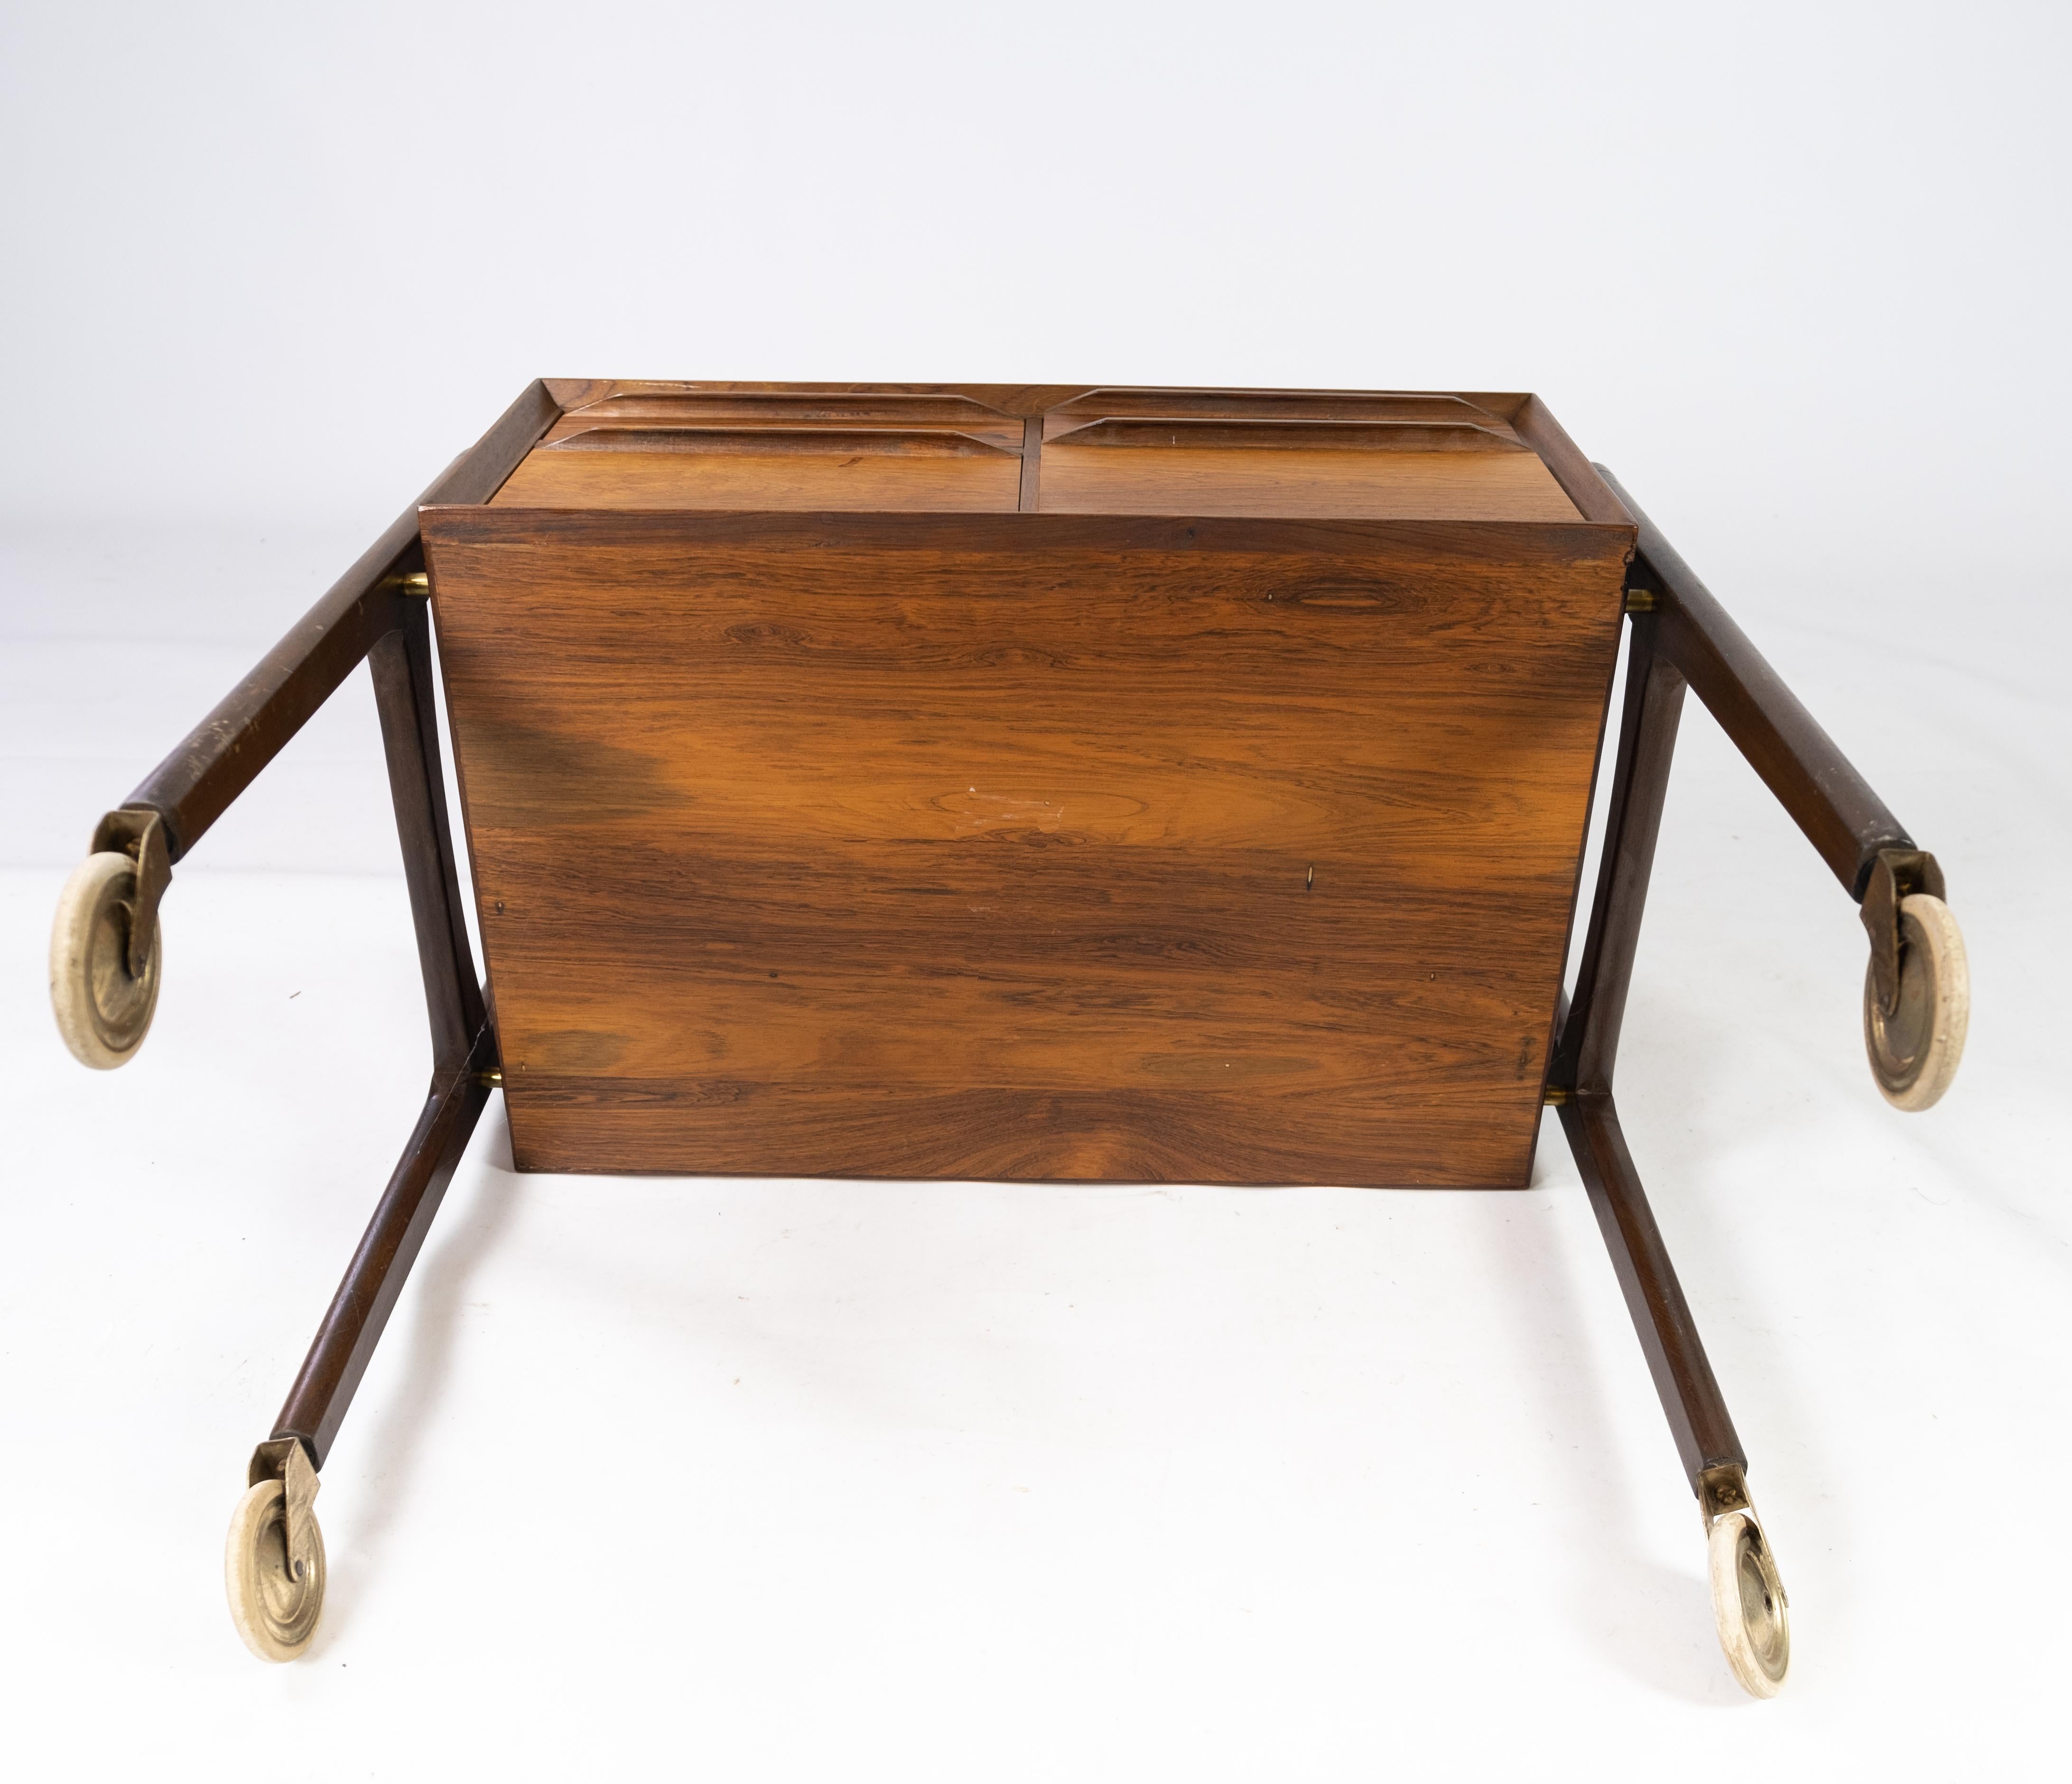 Small Chest of Drawers on Wheels in Rosewood of Danish Design from the 1960s For Sale 8